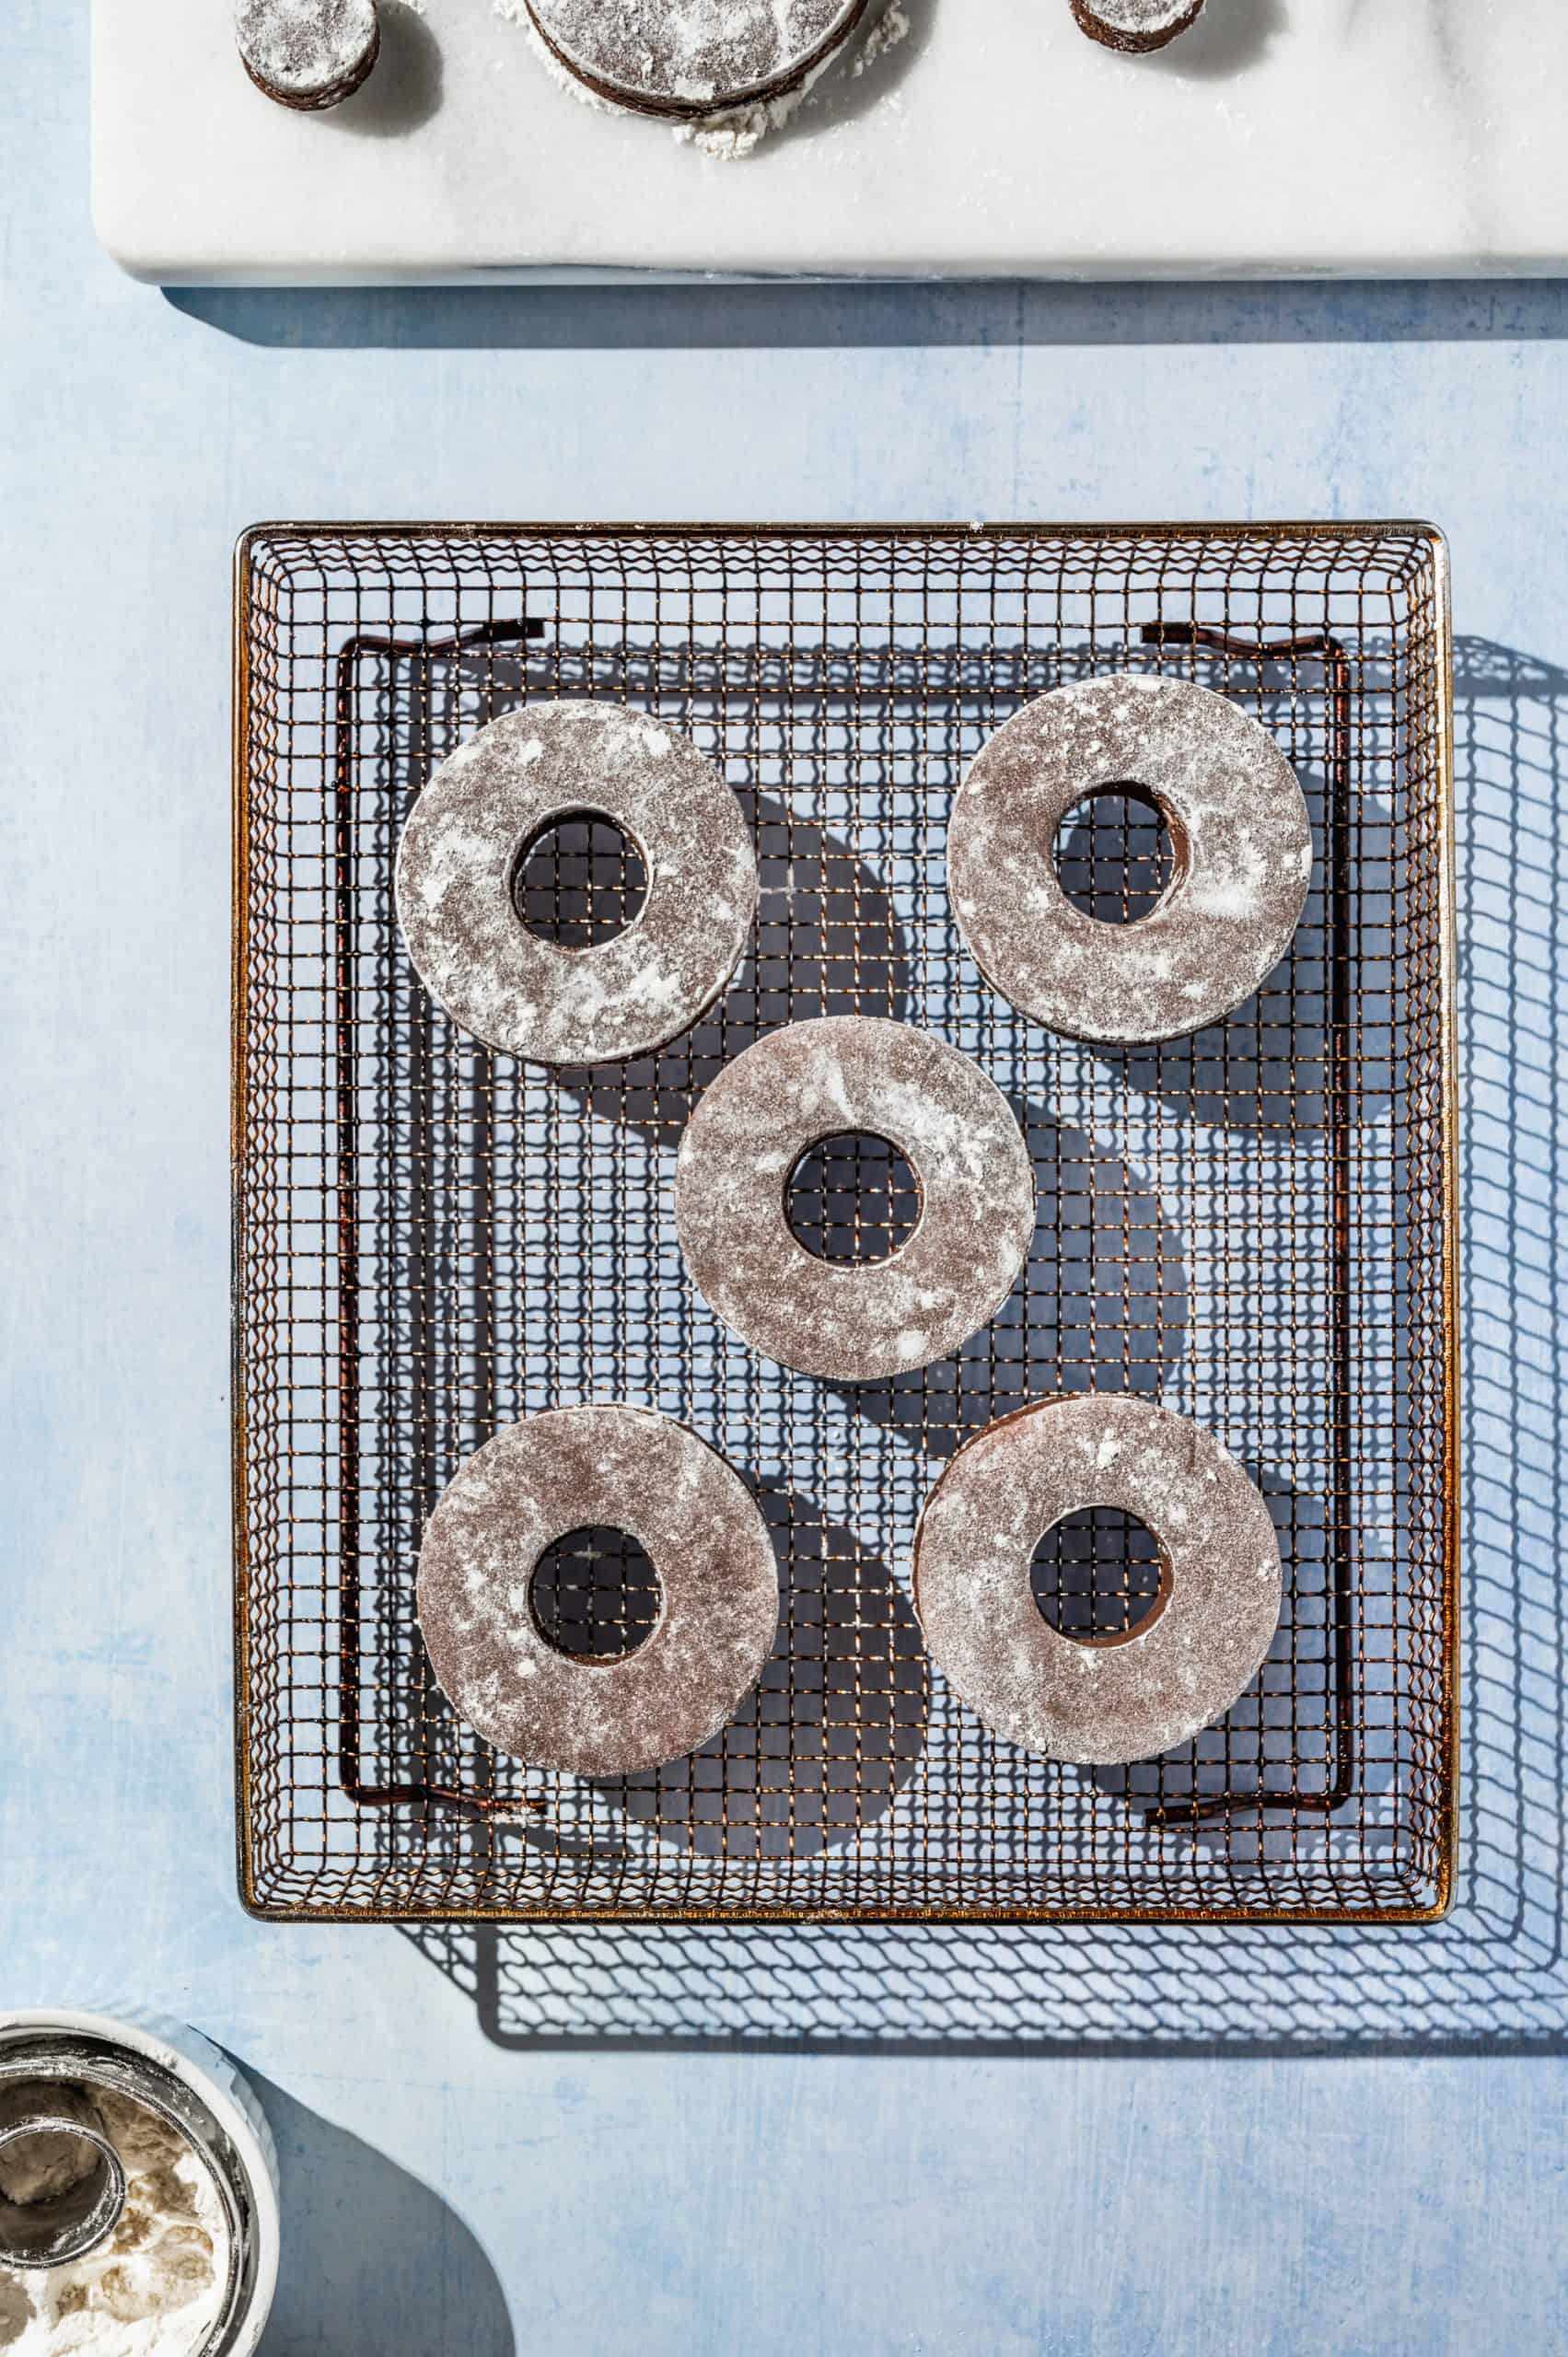 5 chocolate cake donuts dusted with flour on an air fryer tray before cooking